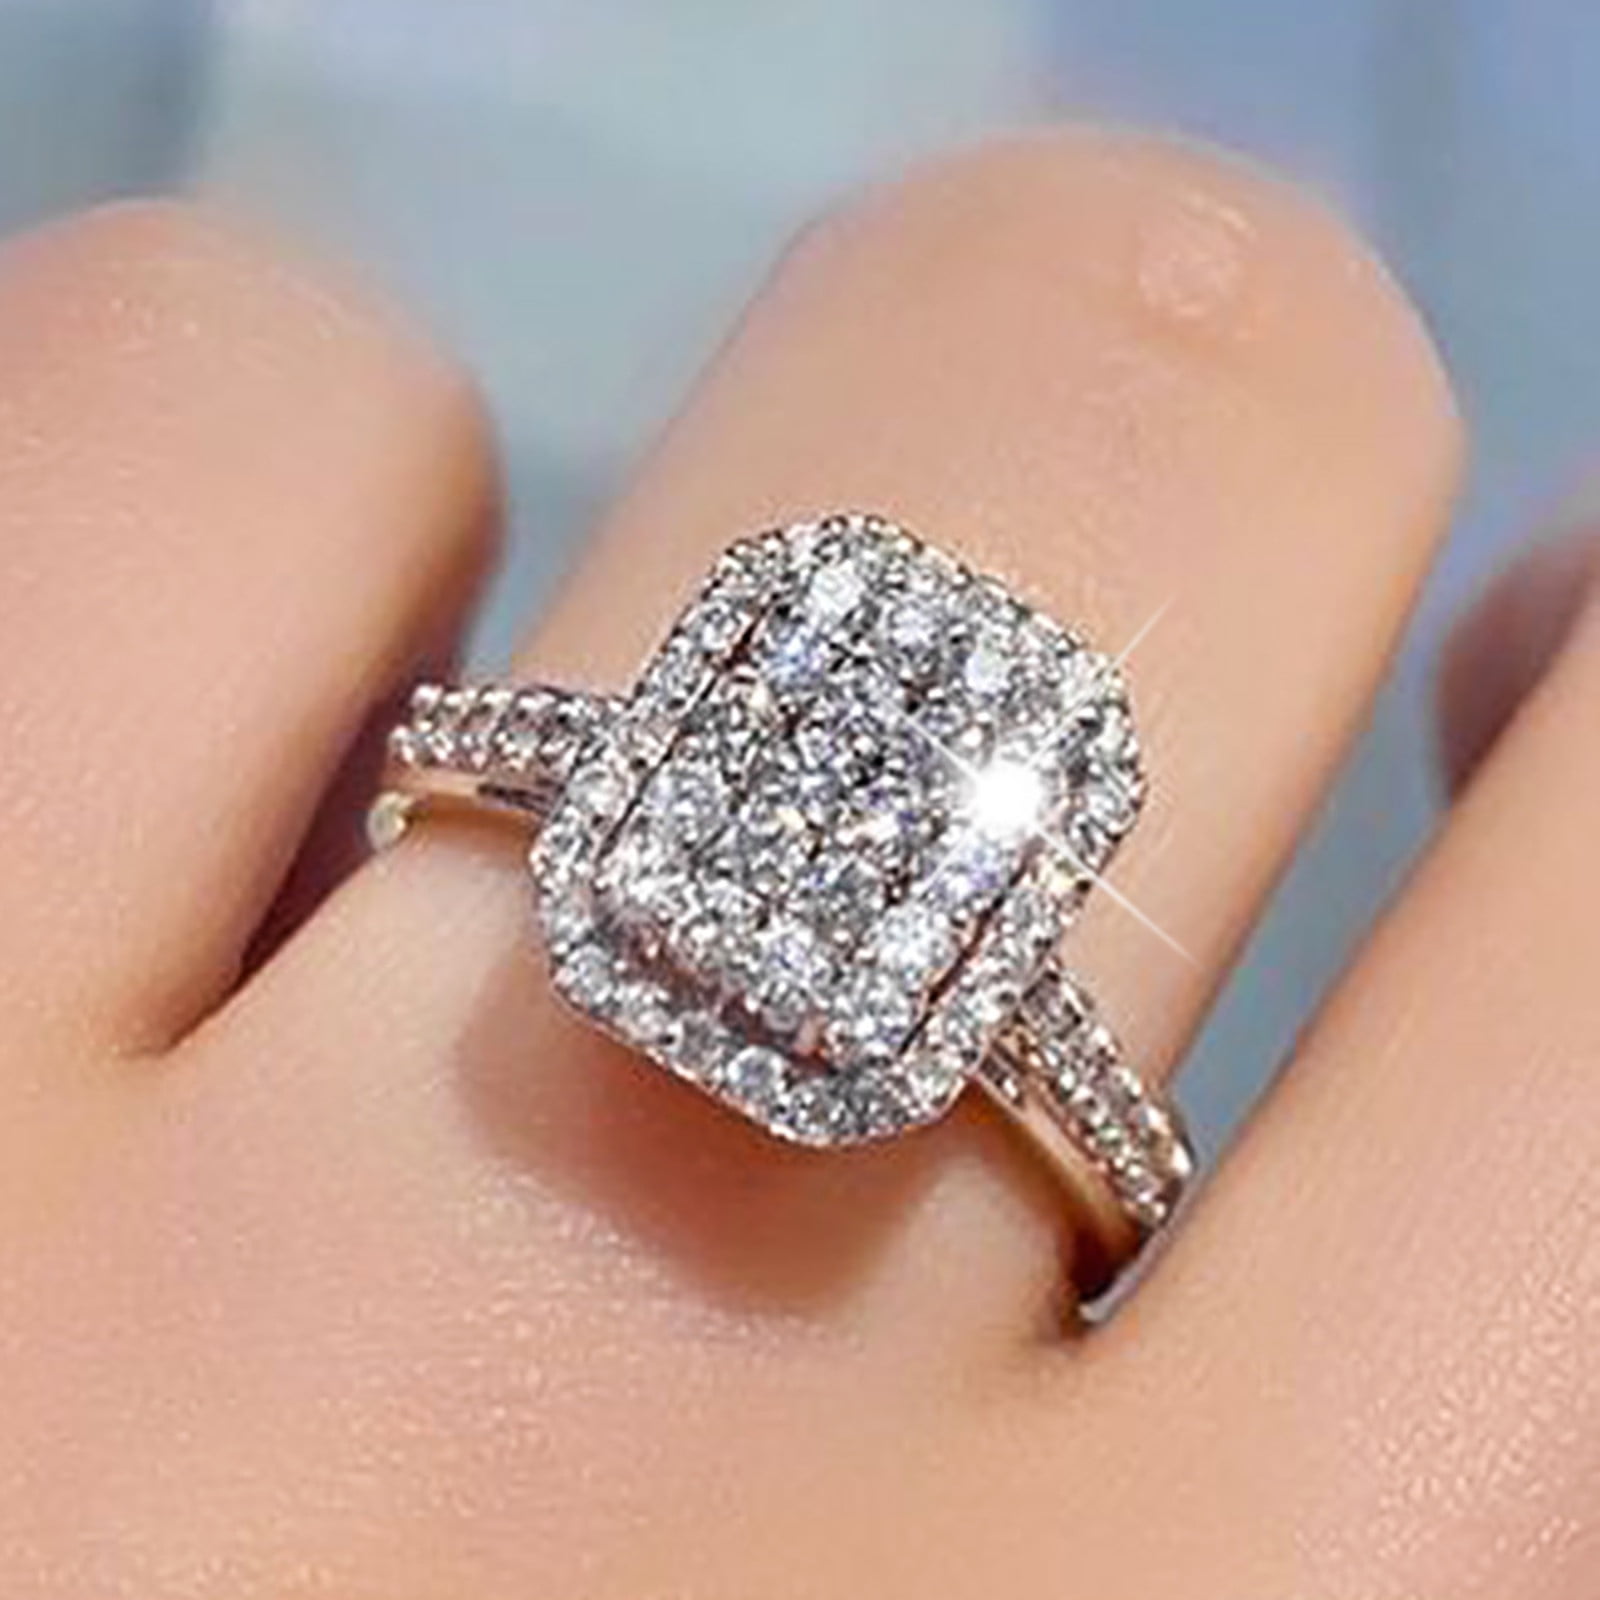 Jewelry for Women Rings Womens Vintage Beautiful Diamond Silver Engagement Wedding Band Ring Cute Ring Pack Trendy Jewelry Gift for Her, Adult Unisex